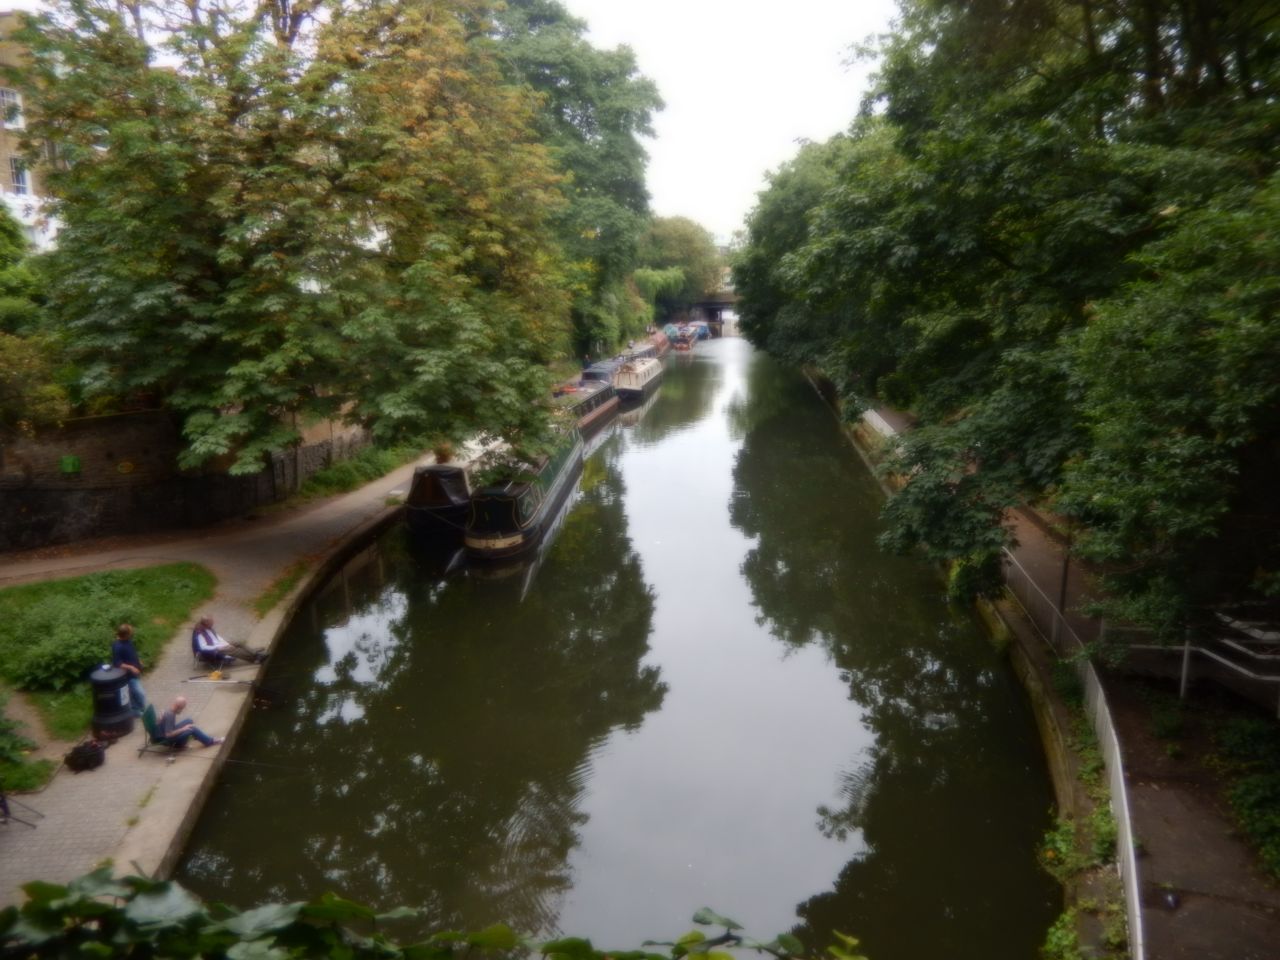 Tensions have arisen between boaters and the population on land in some places. In Islington, London, locals have complained about noise and pollution from boaters, and succeeded in placing restrictions on their numbers. 